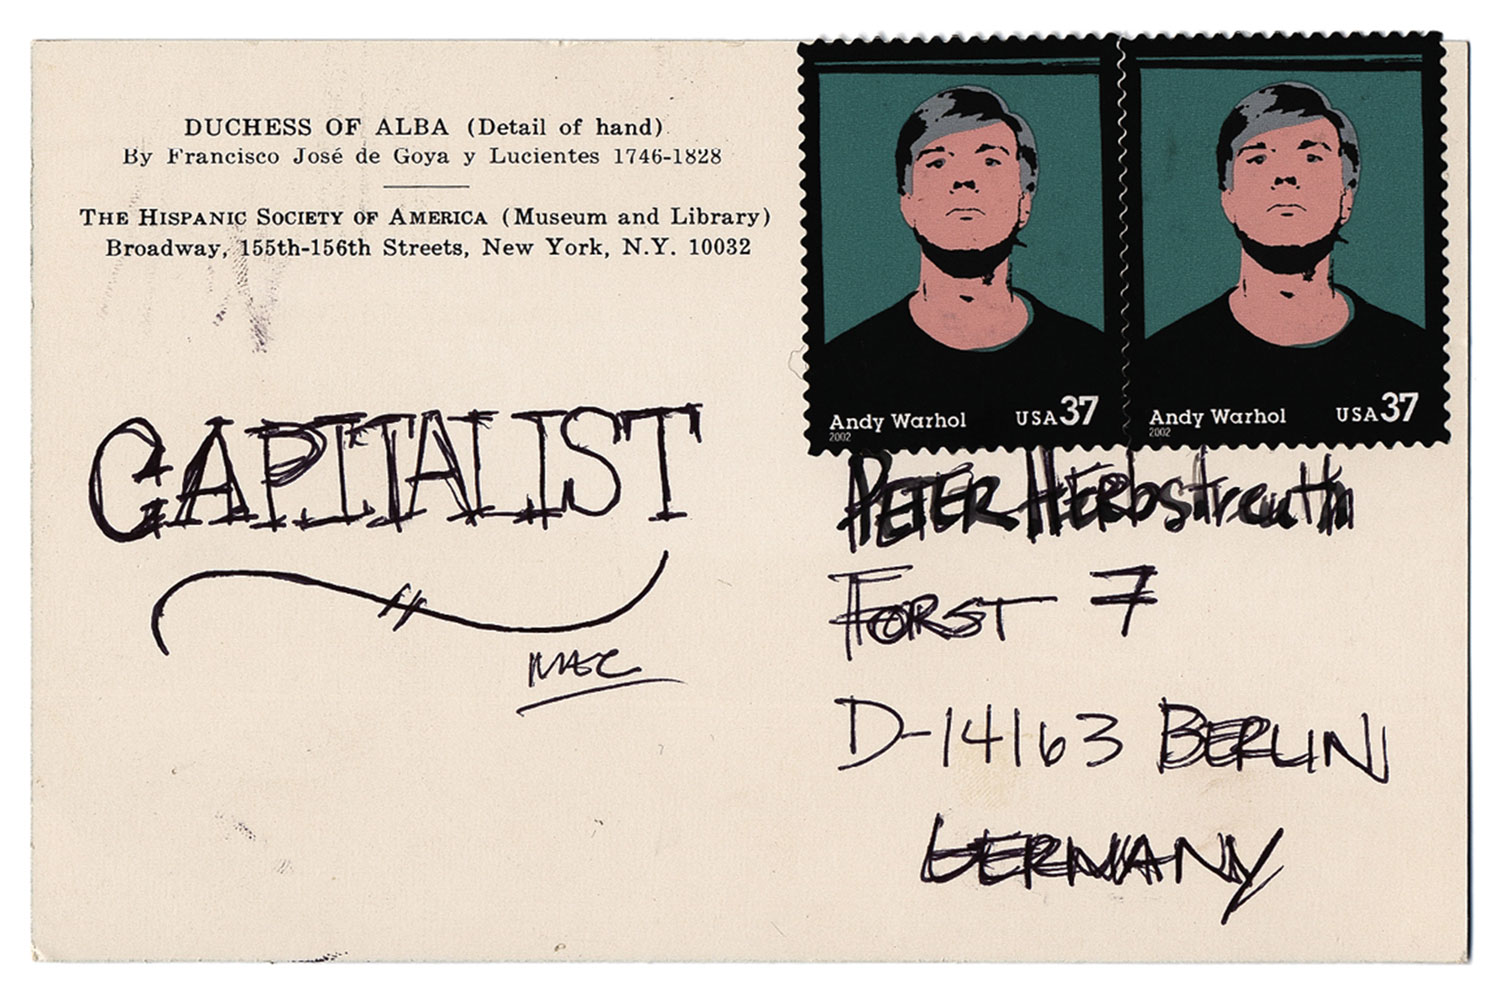 Postcard addressed to Peter Herbstreuth, the word 